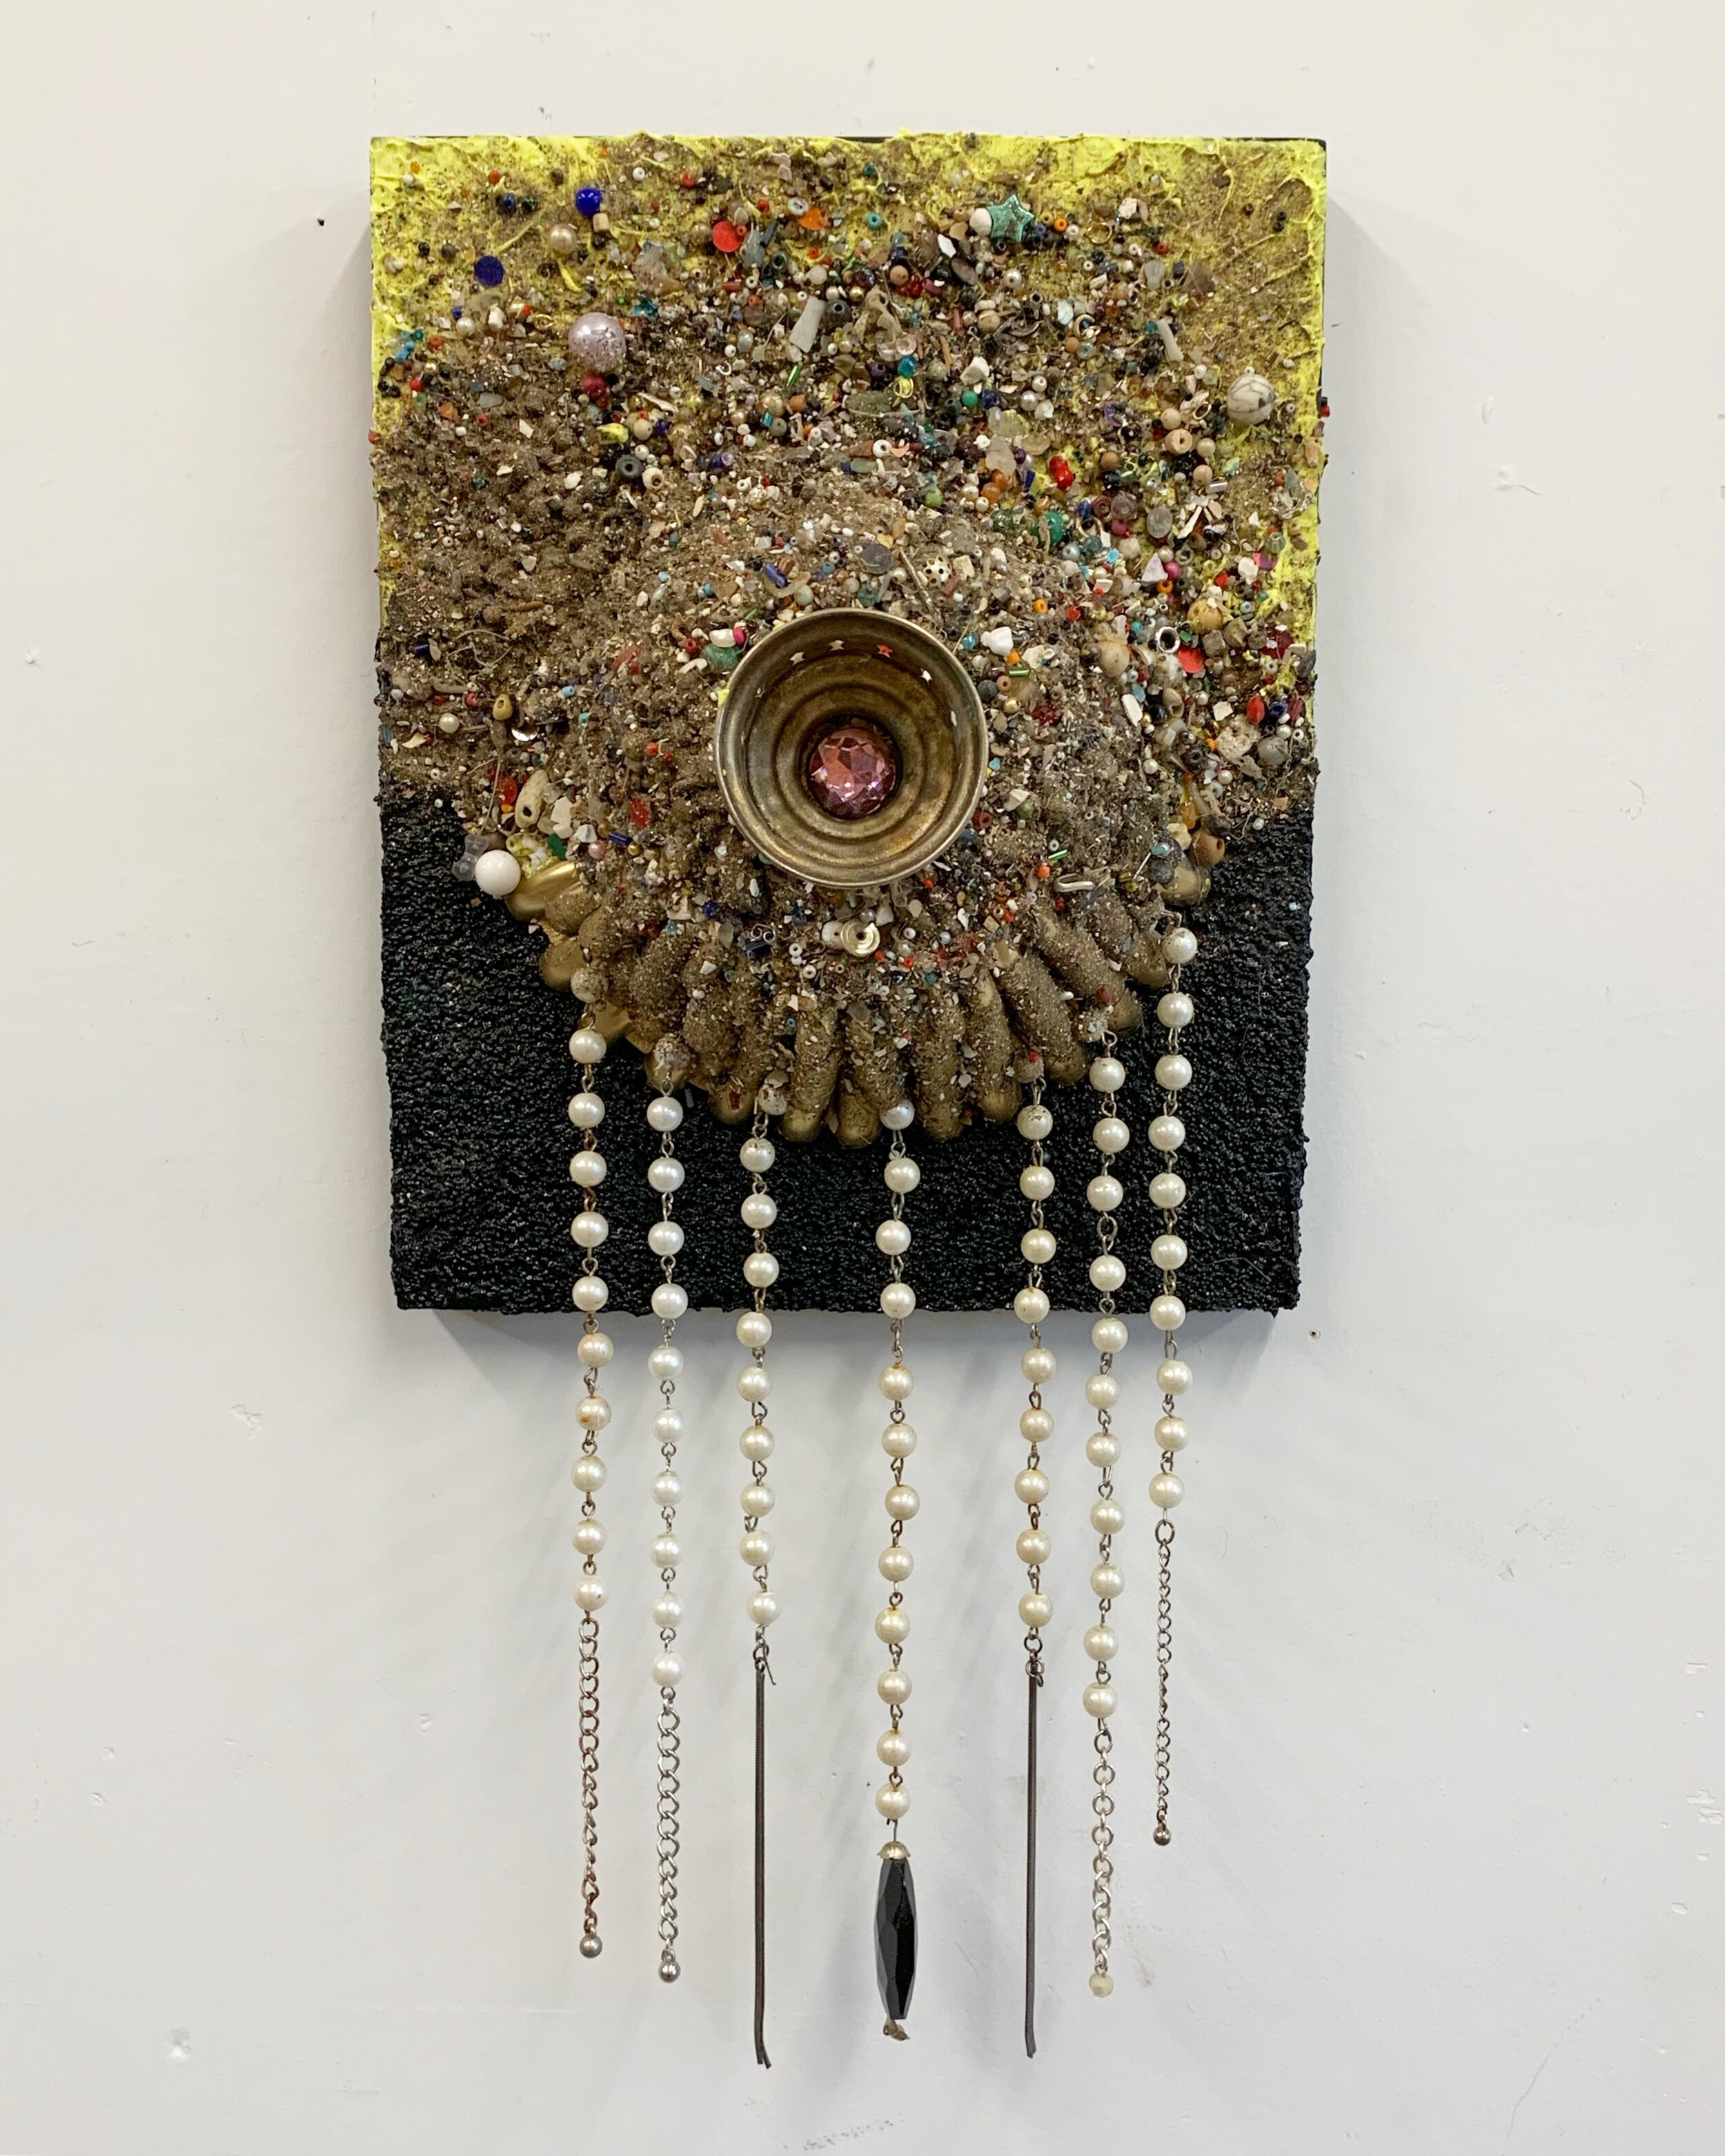   Pendant , 2019 Costume jewelry, faux pearl strands, beads, jewelry dust, and gel bead medium on panel 8x10” 